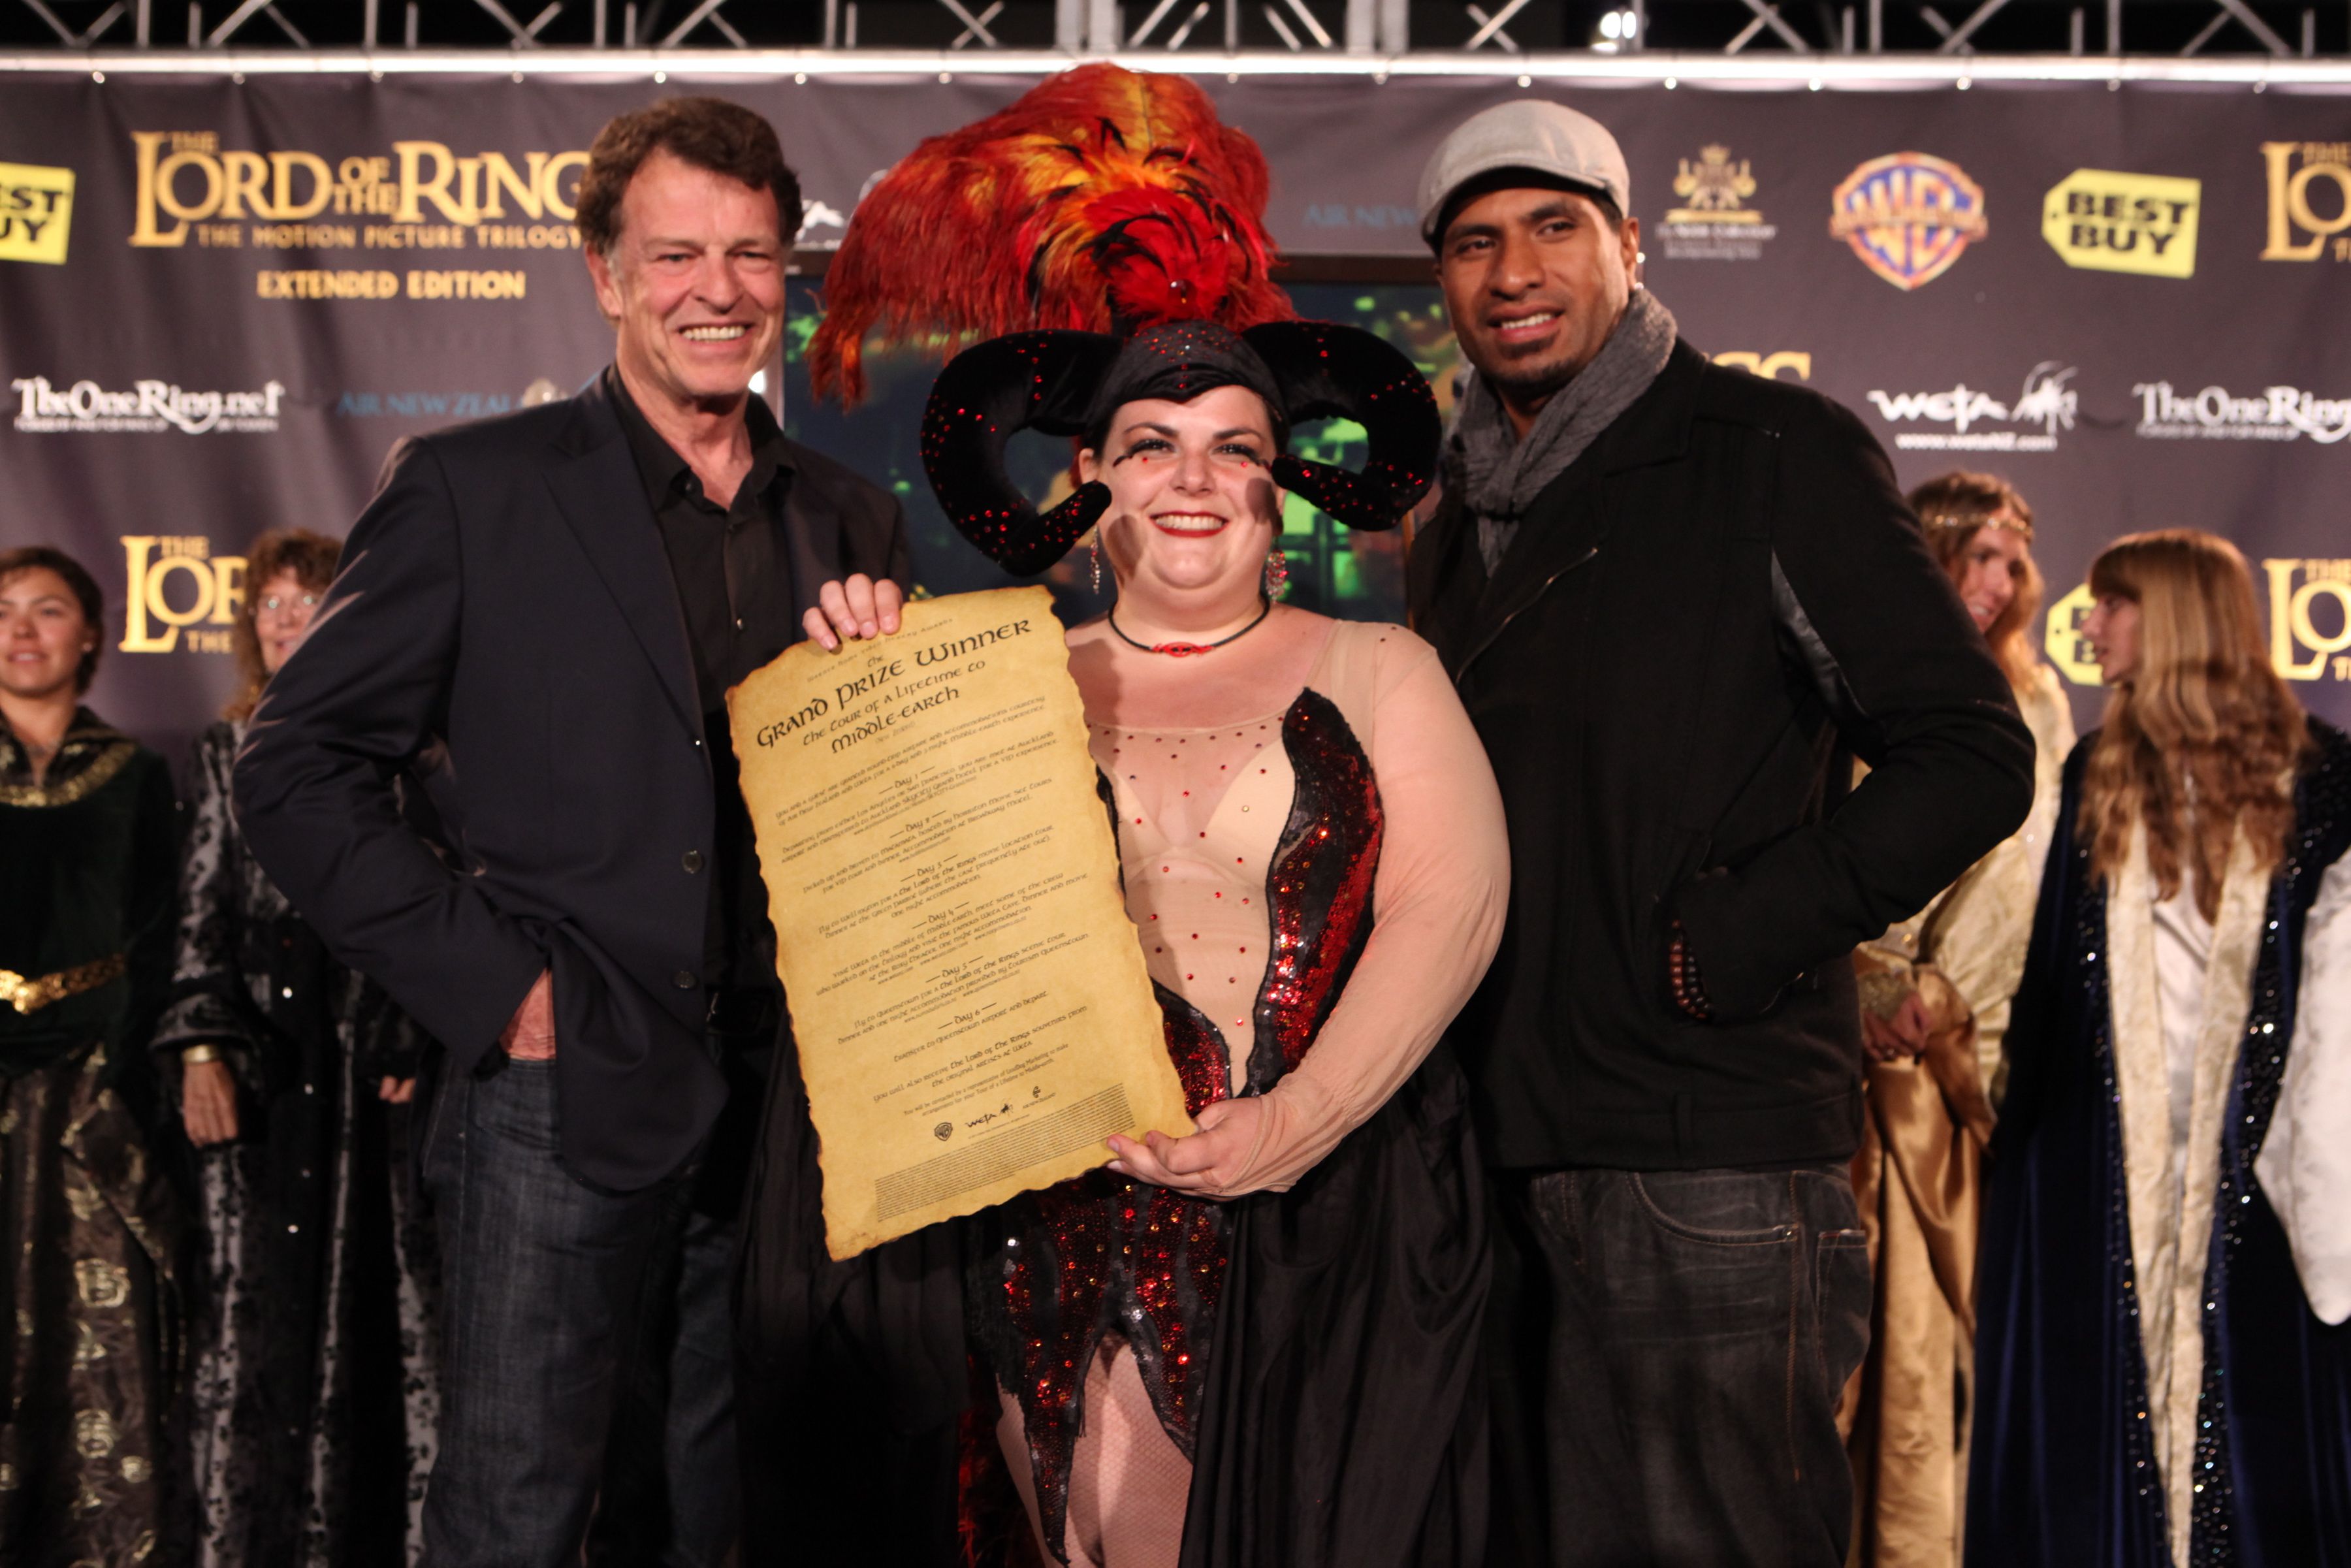 The Lord of the Rings costume contest winner with John Noble and Sala Baker{9}'s Denethor was featured in {10}, but the actor actually made his Middle Earth debut in {11}. Although the scenes were ultimately cut from the theatrical version, fans can enjoy his work as Denethor in this Extended Edition Blu-ray trilogy.